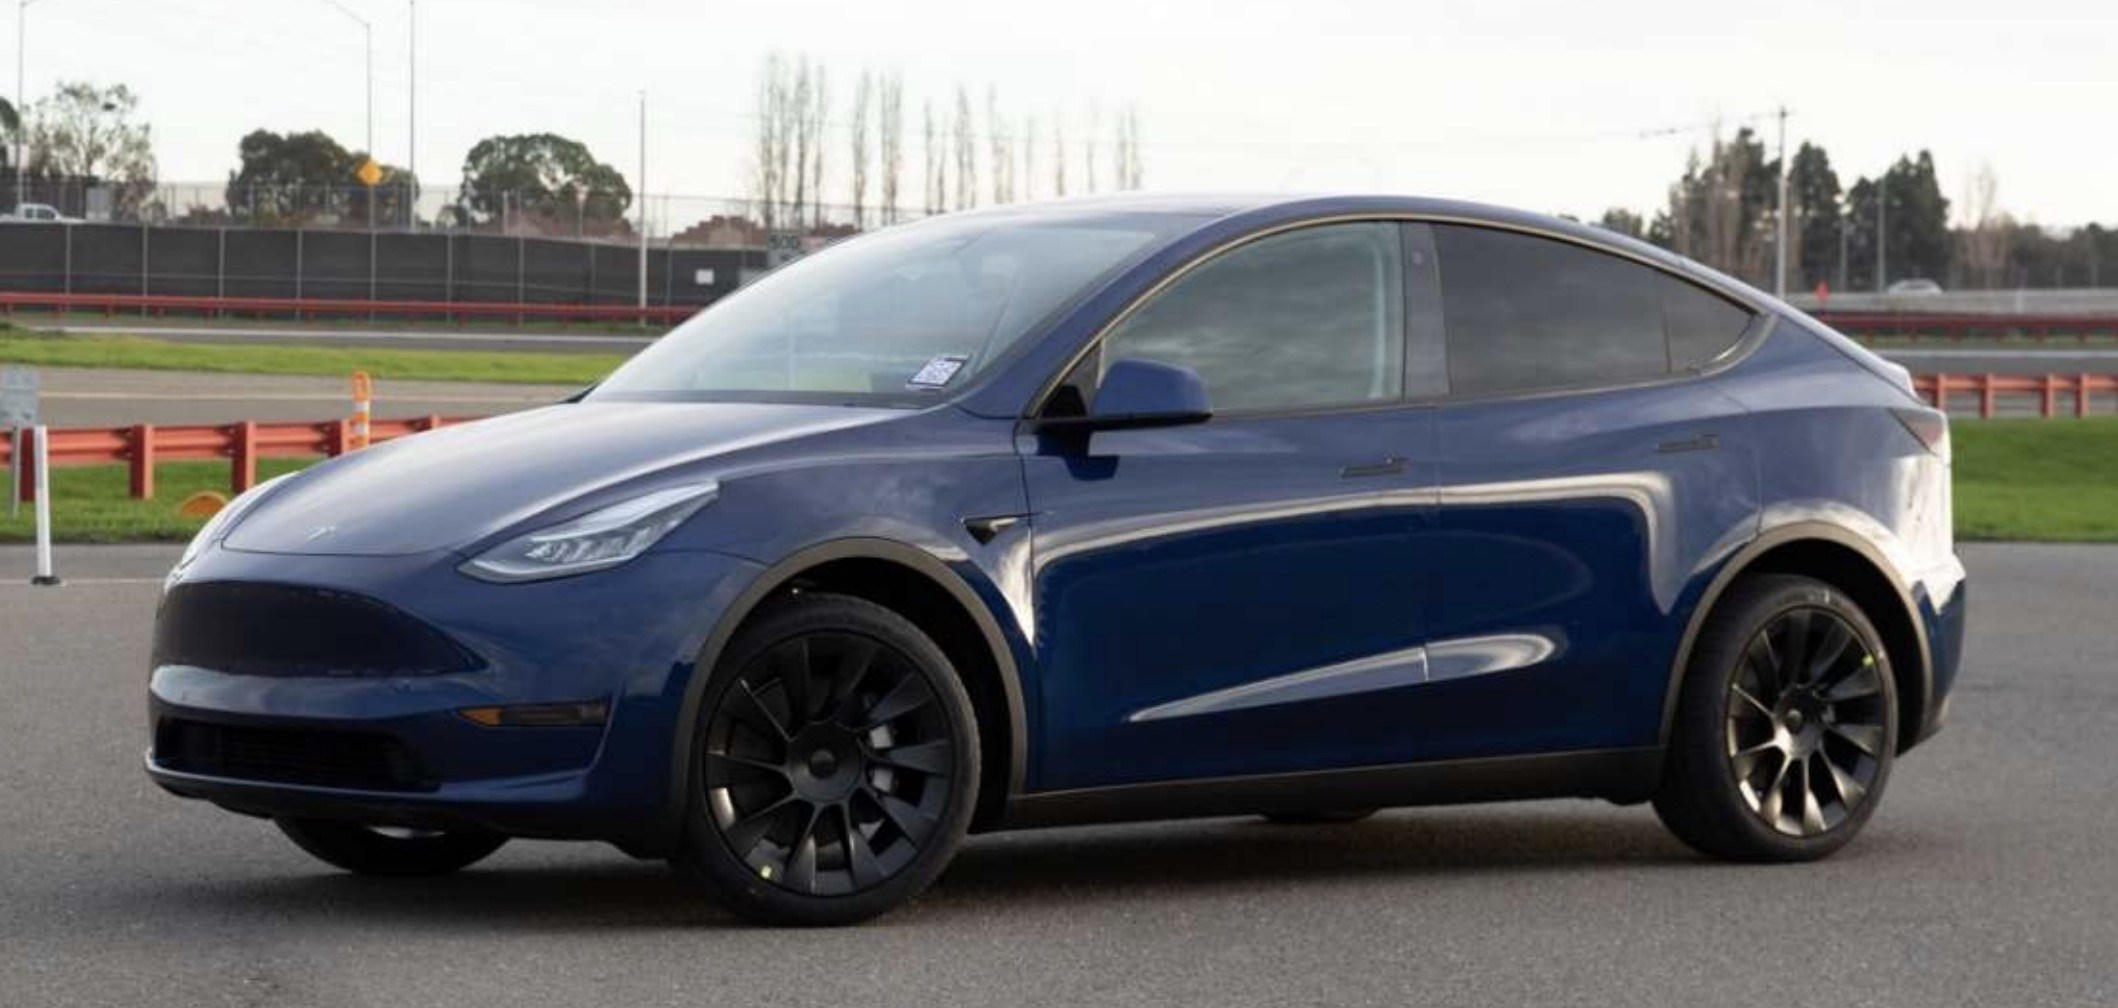 Tesla starts production of 7seater Model Y electric SUV with third row